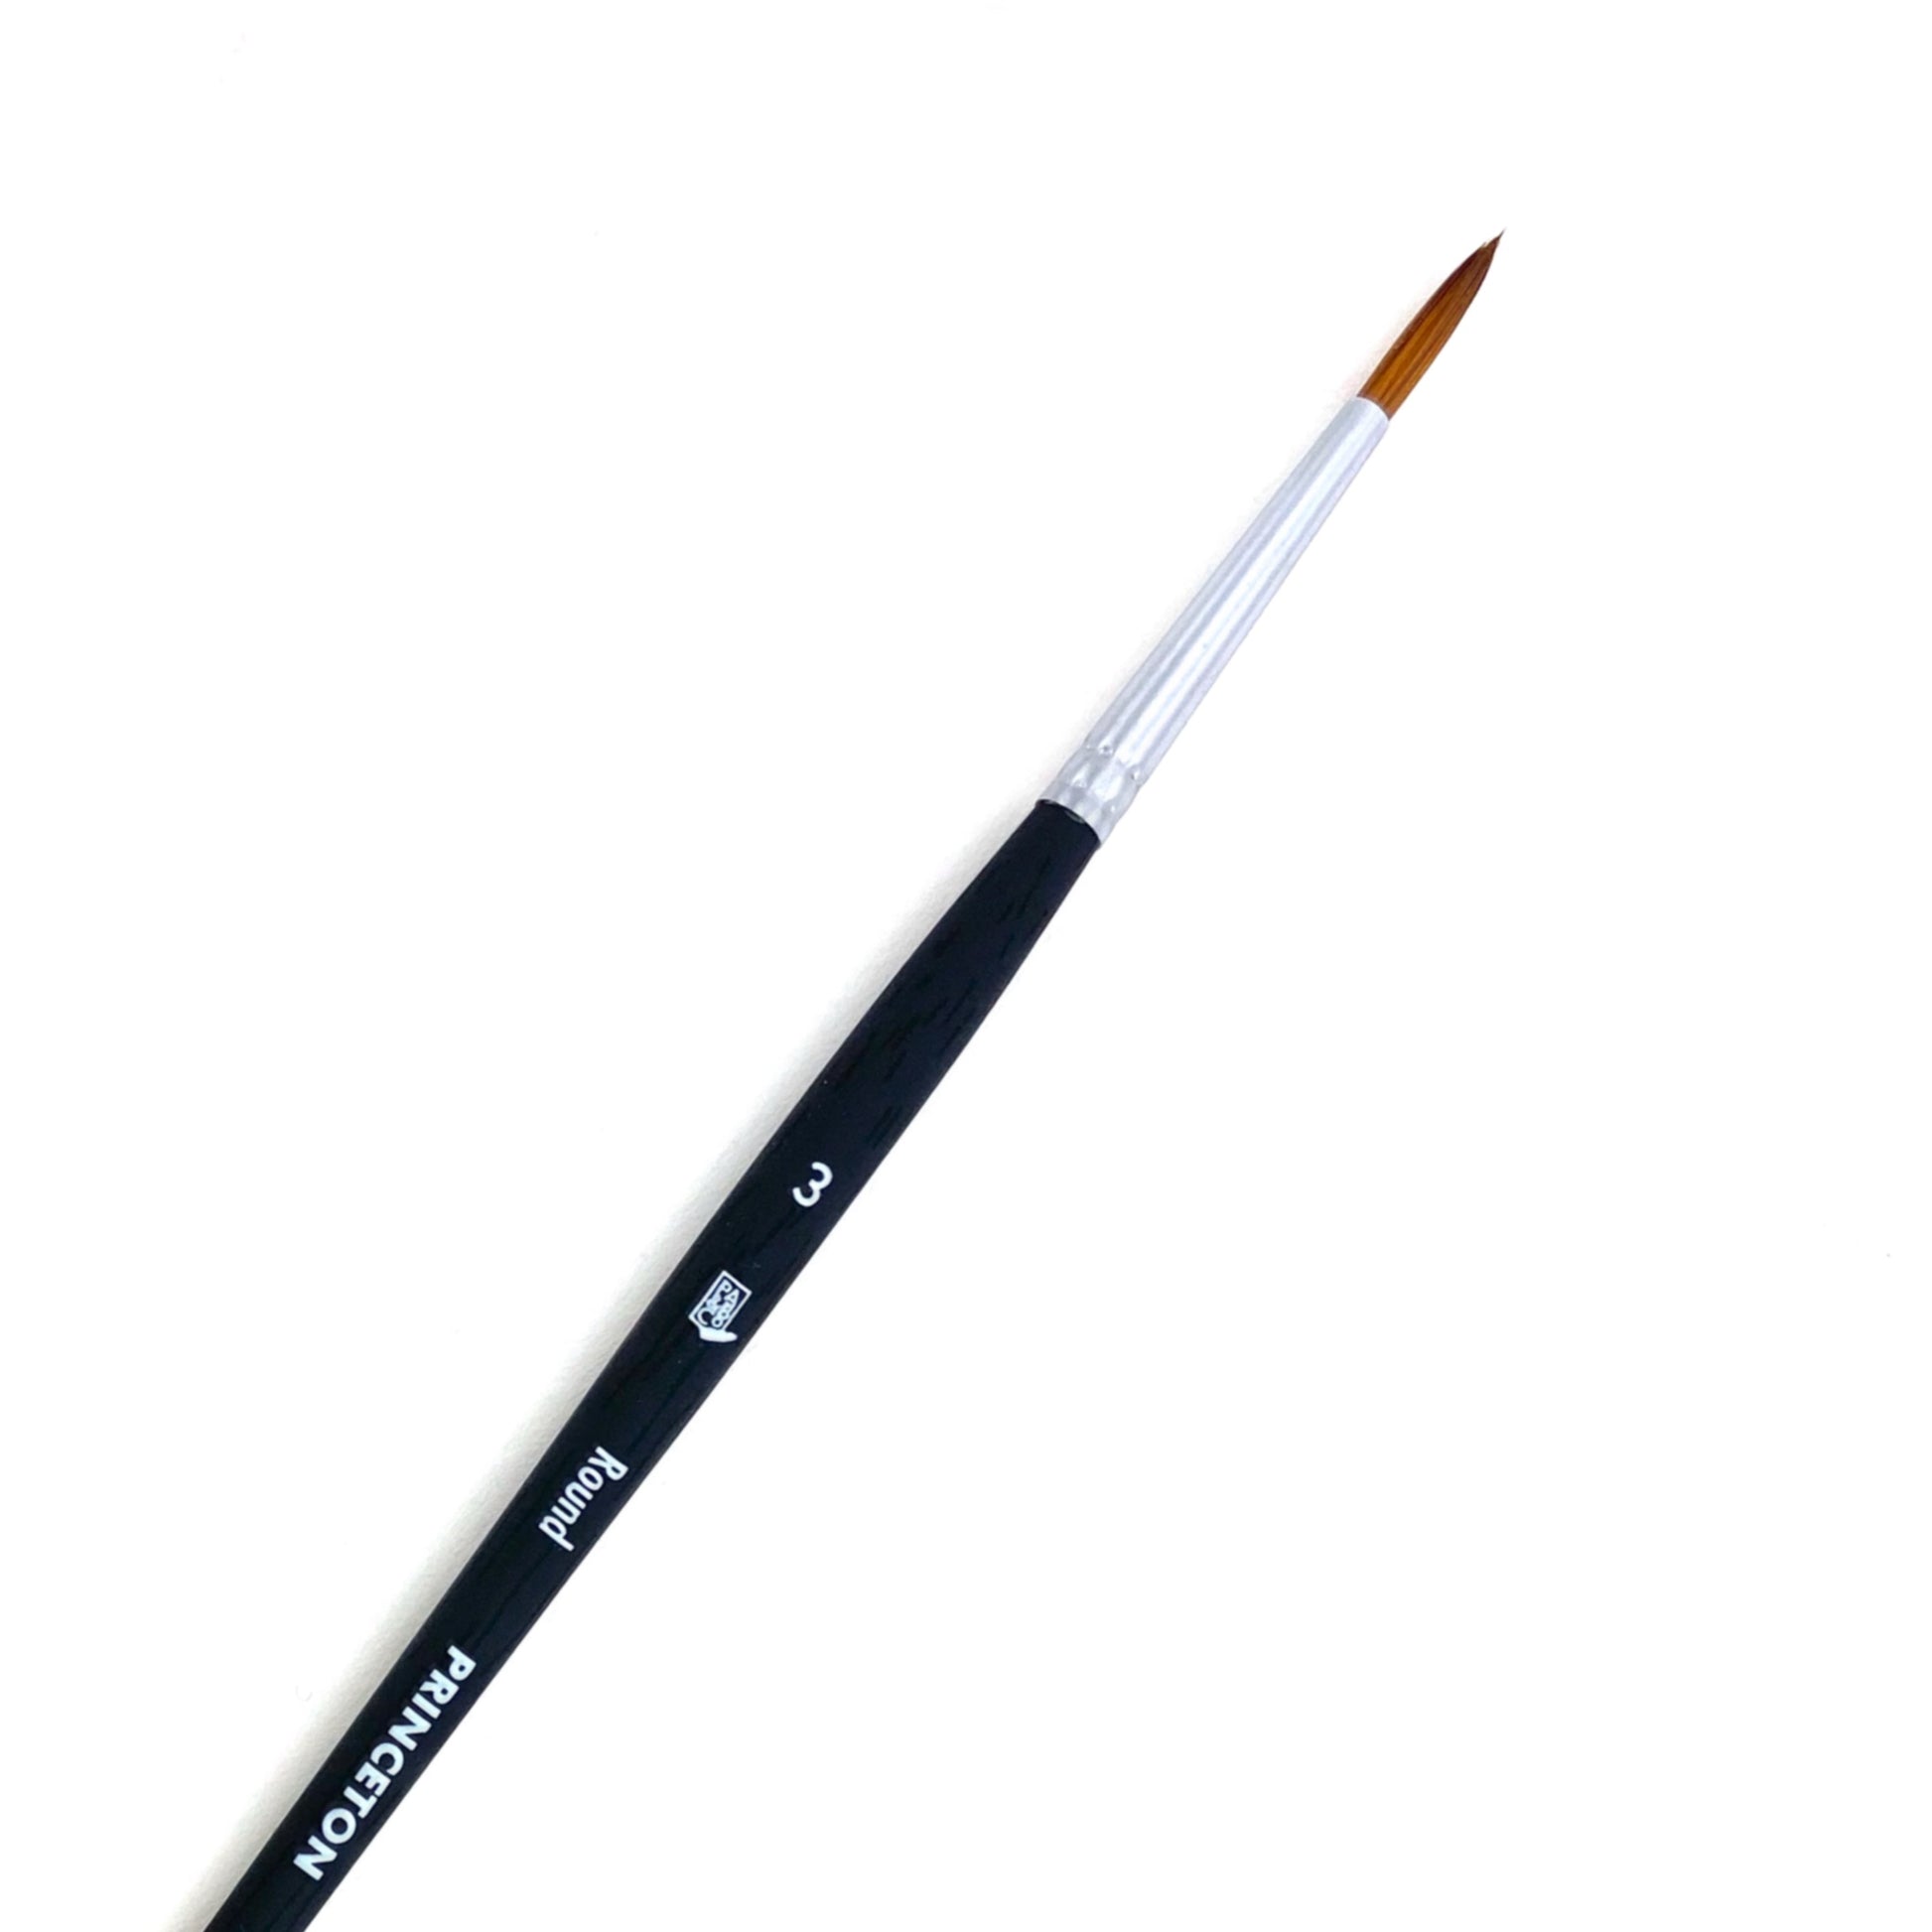 Professional Watercolor Synthetic Sable Brushes Round